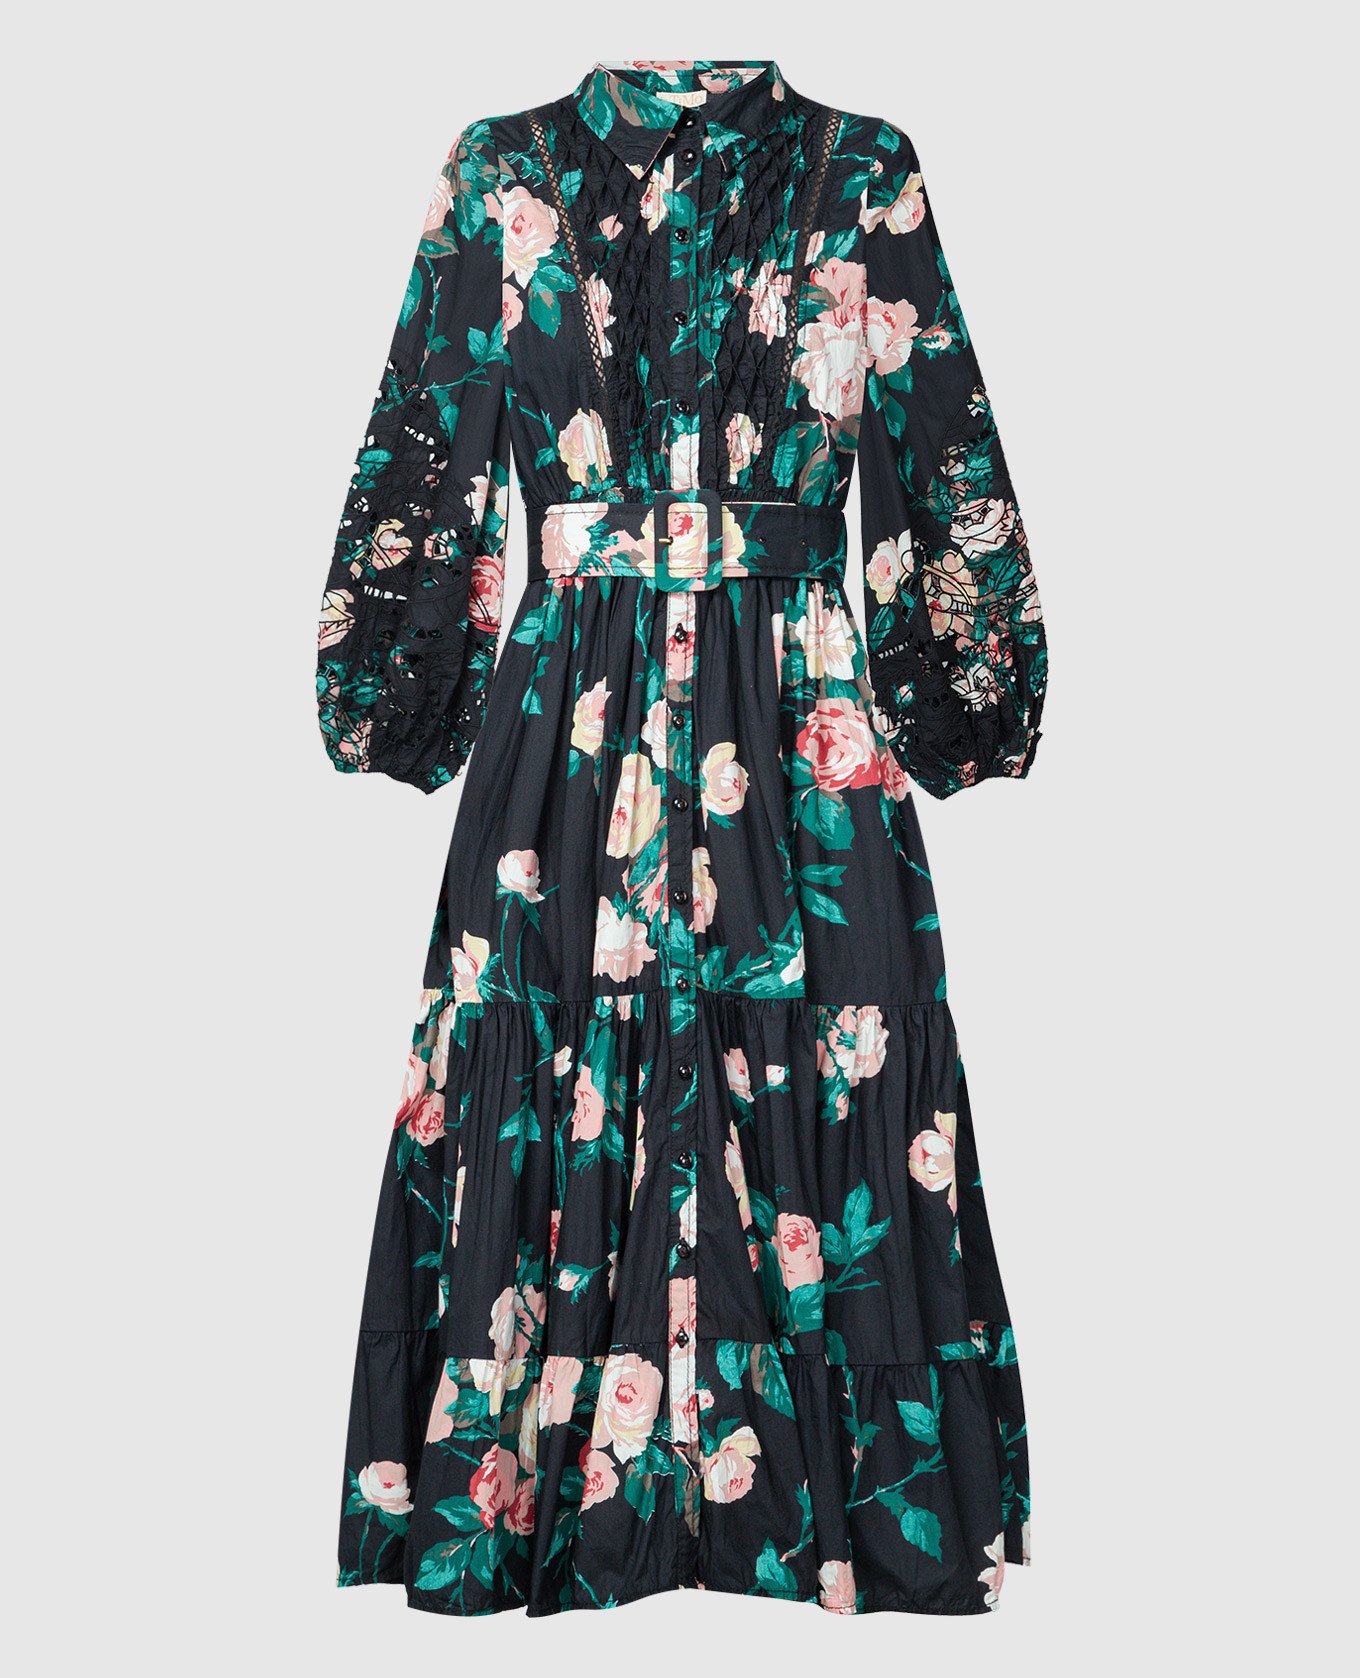 Black midi shirt dress in floral print with embroidery